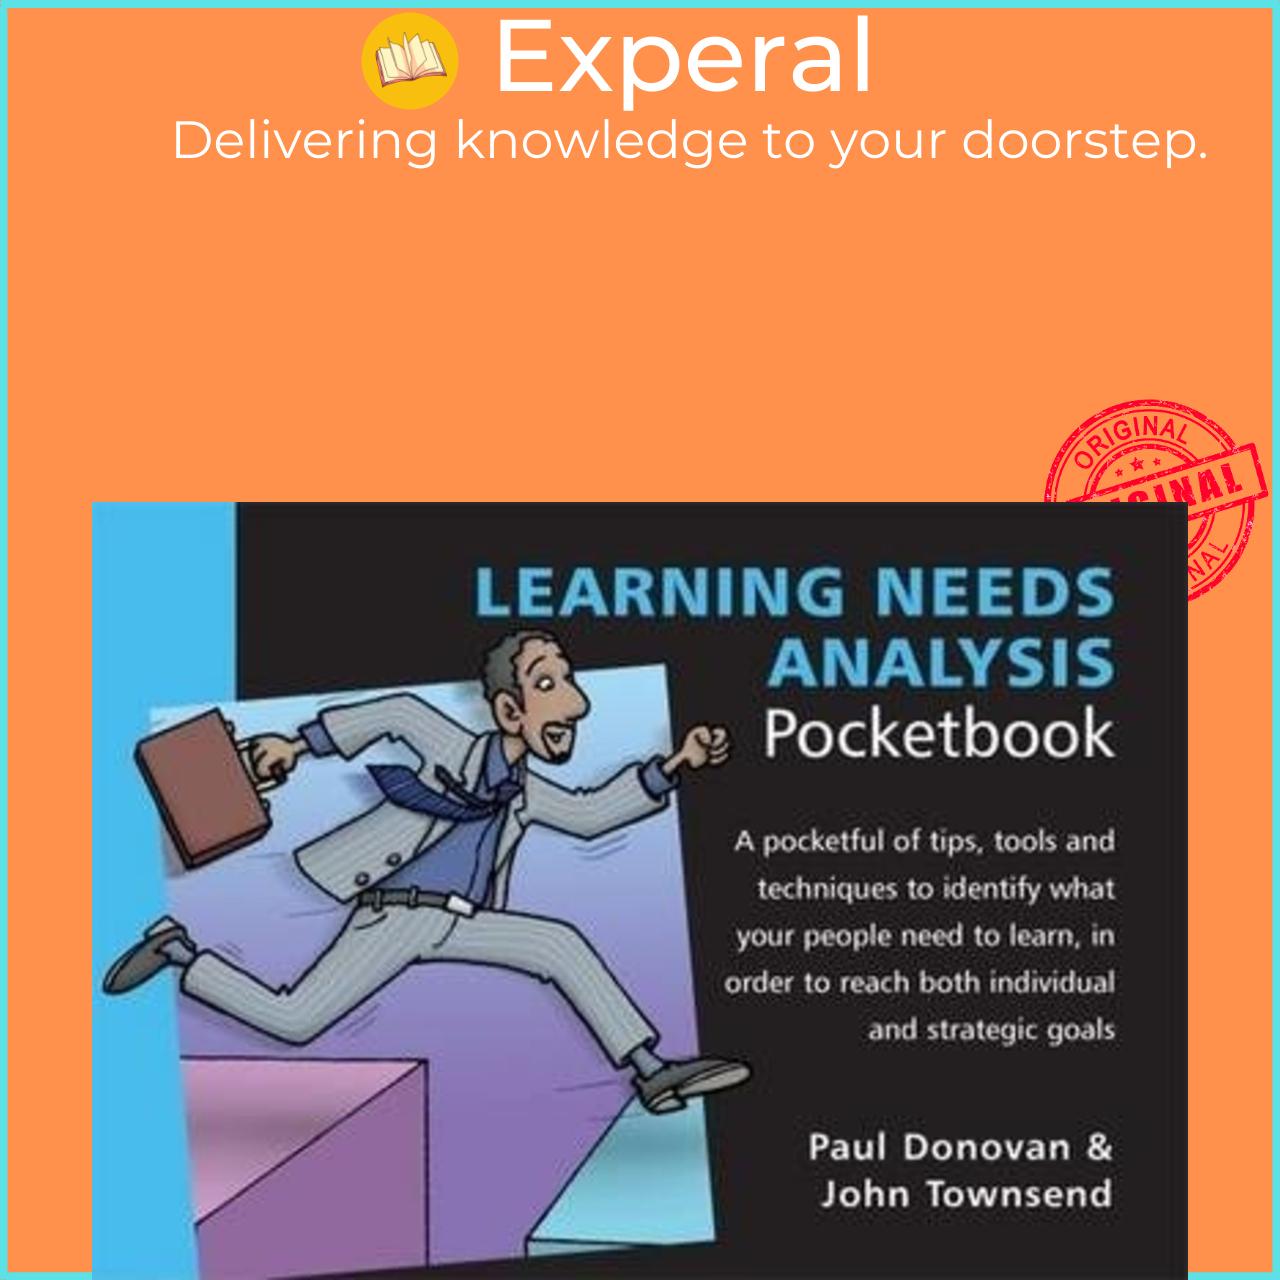 Sách - Learning Needs Analysis Pocketbook : Learning Needs Analy by Paul Donovan & John Townsend (UK edition, paperback)